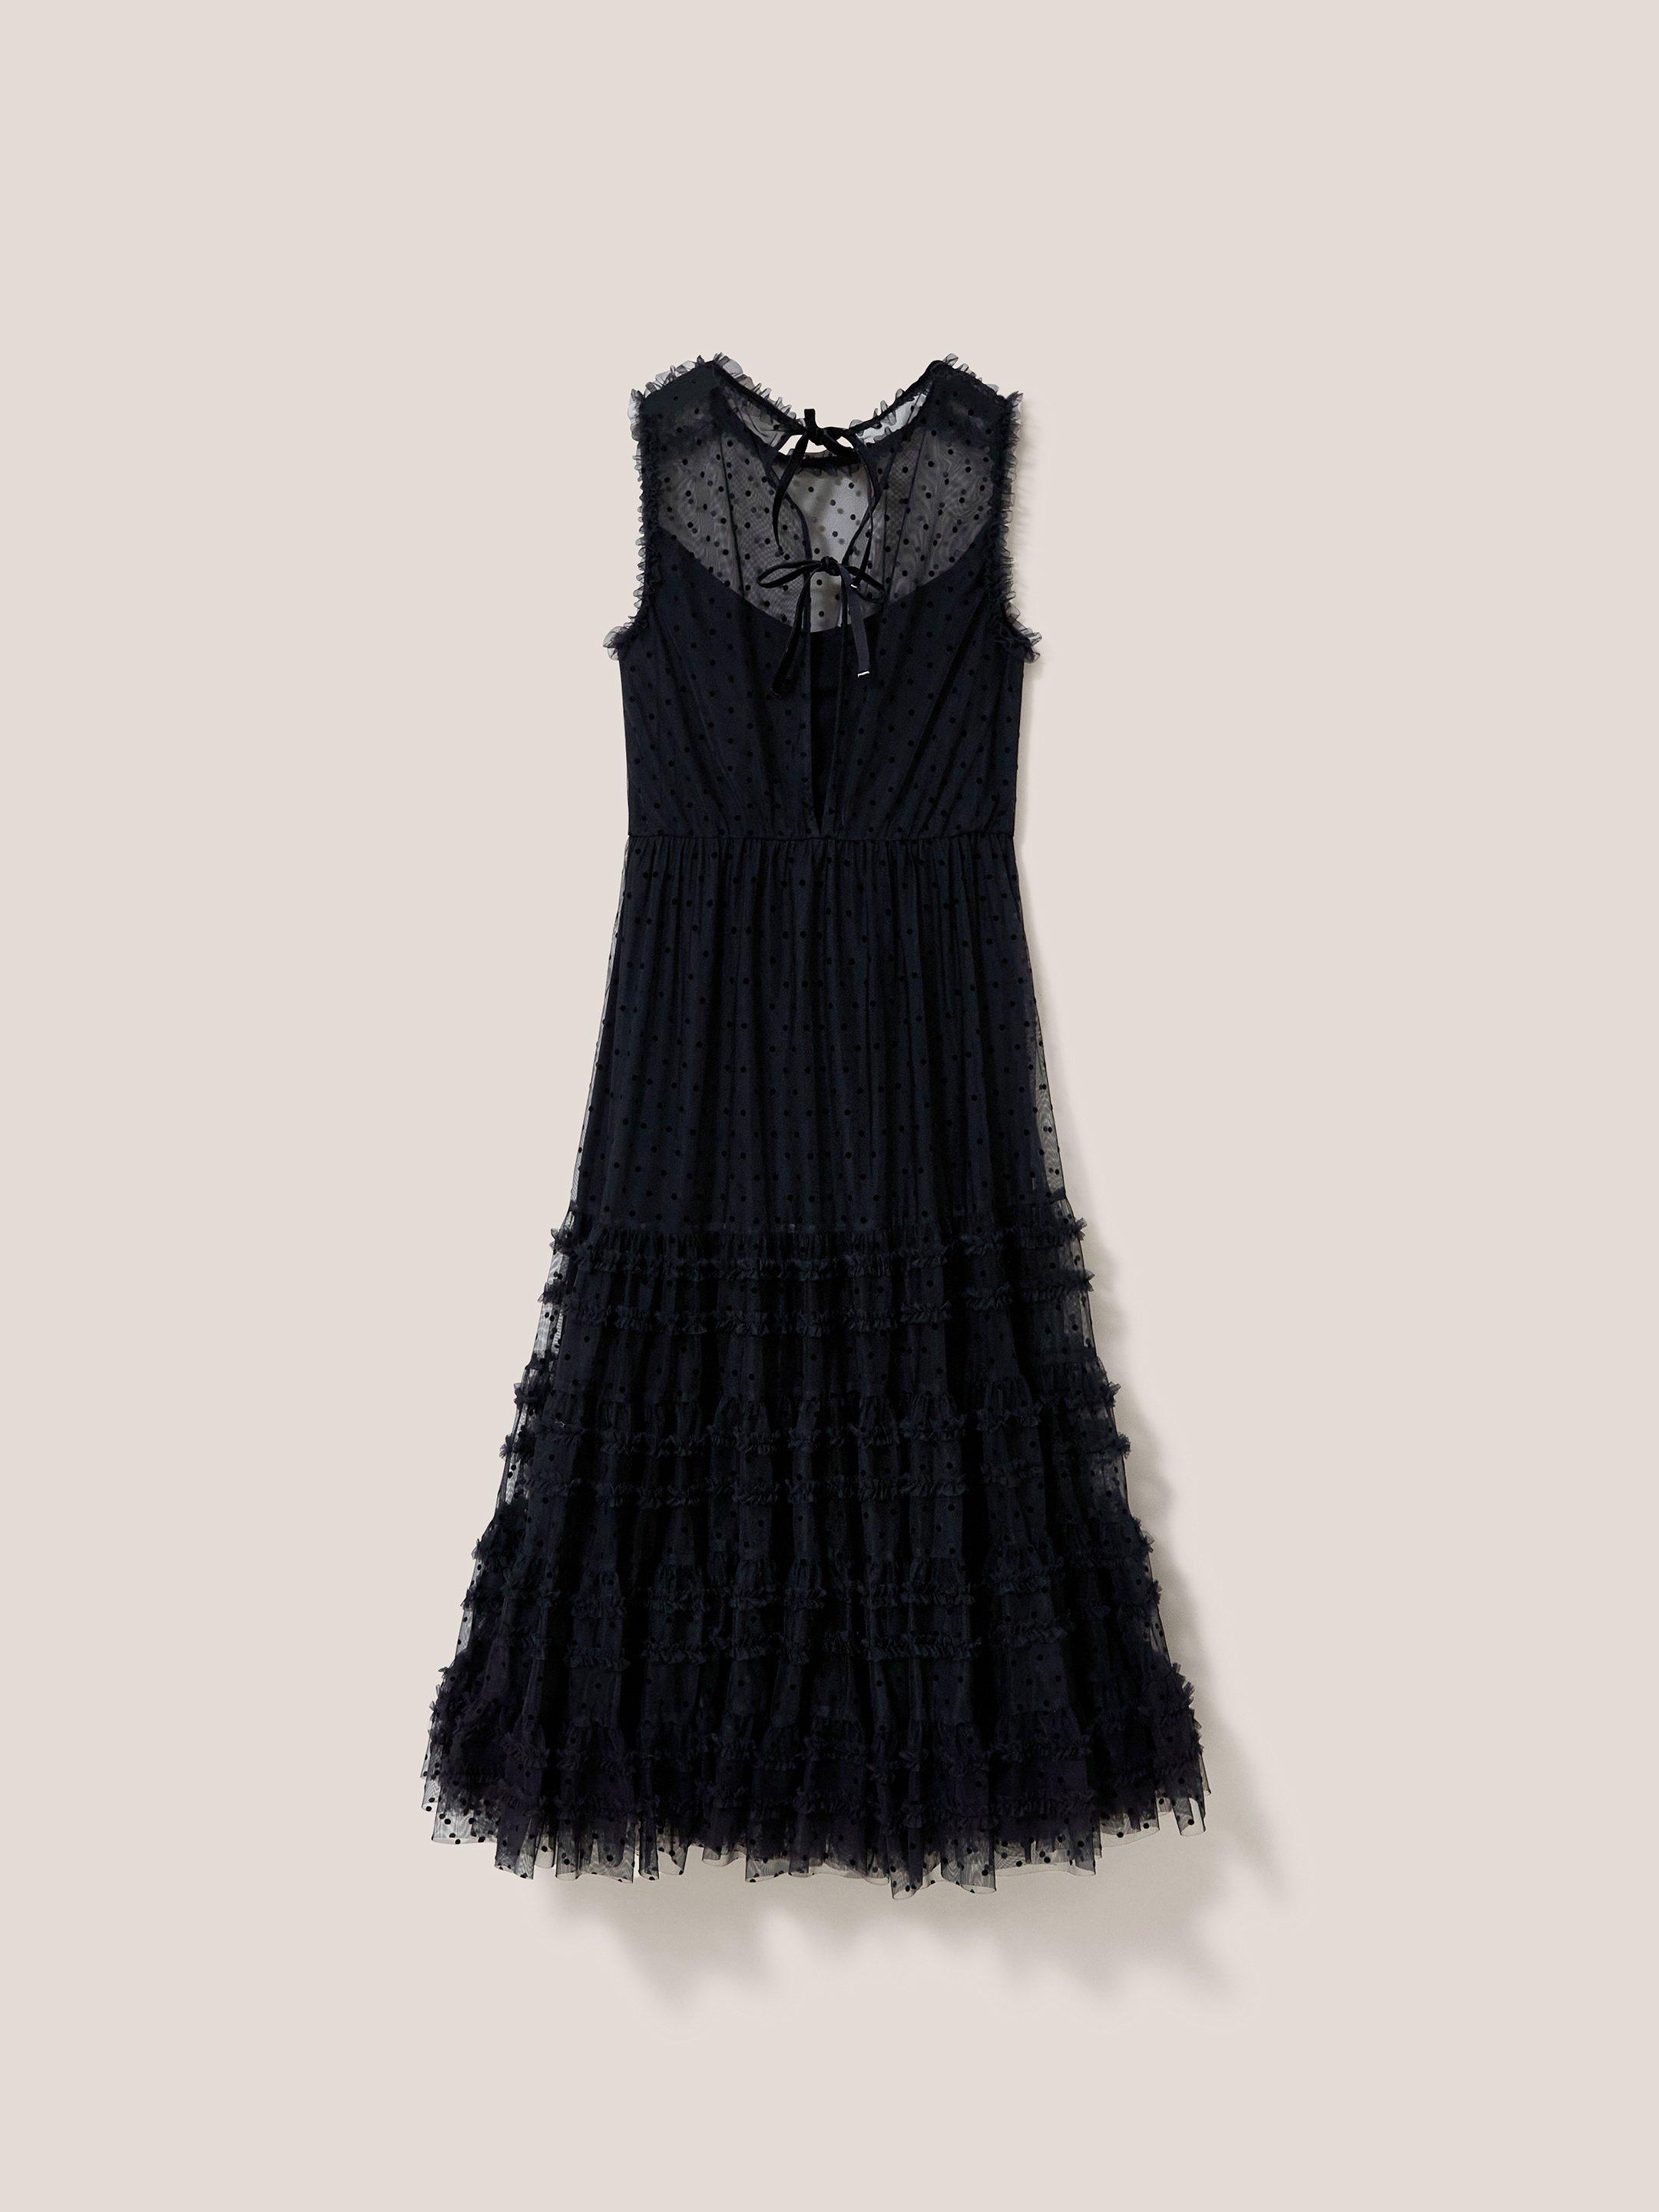 Hiral Flock Spot Tulle Dress in PURE BLK - FLAT BACK